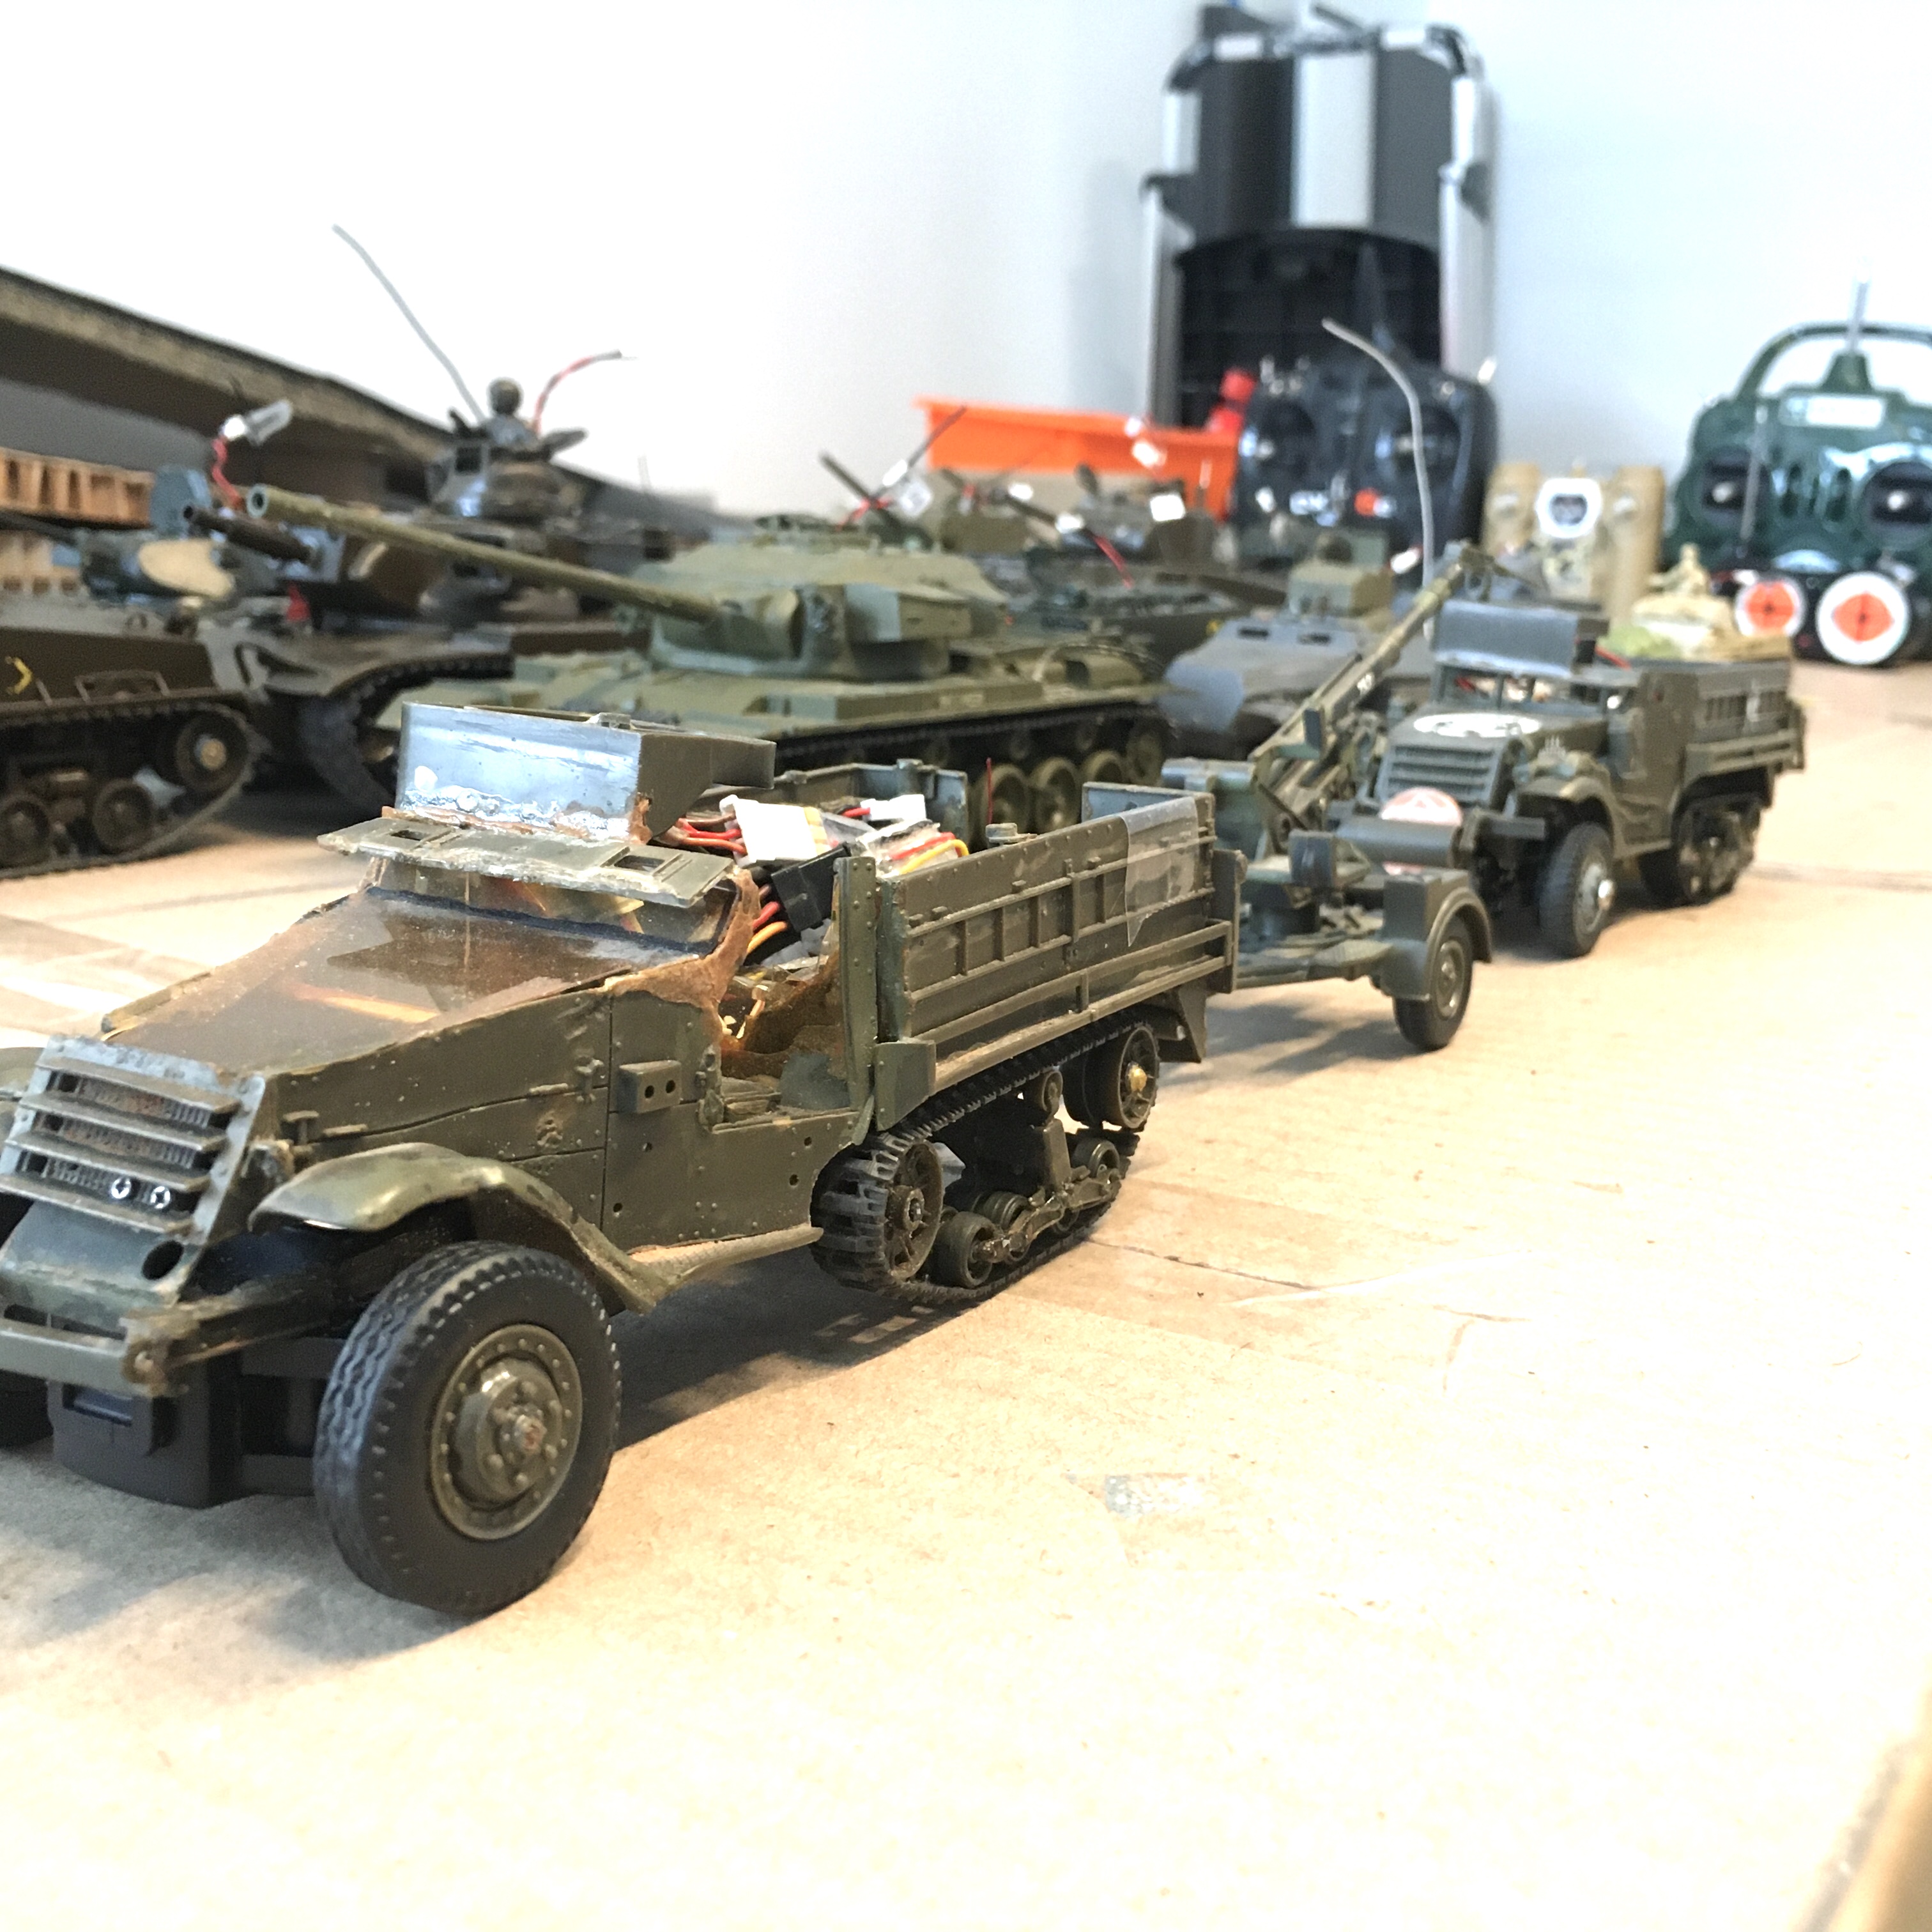 Half track convoy. Both of these models are DSMX with Telemetry.